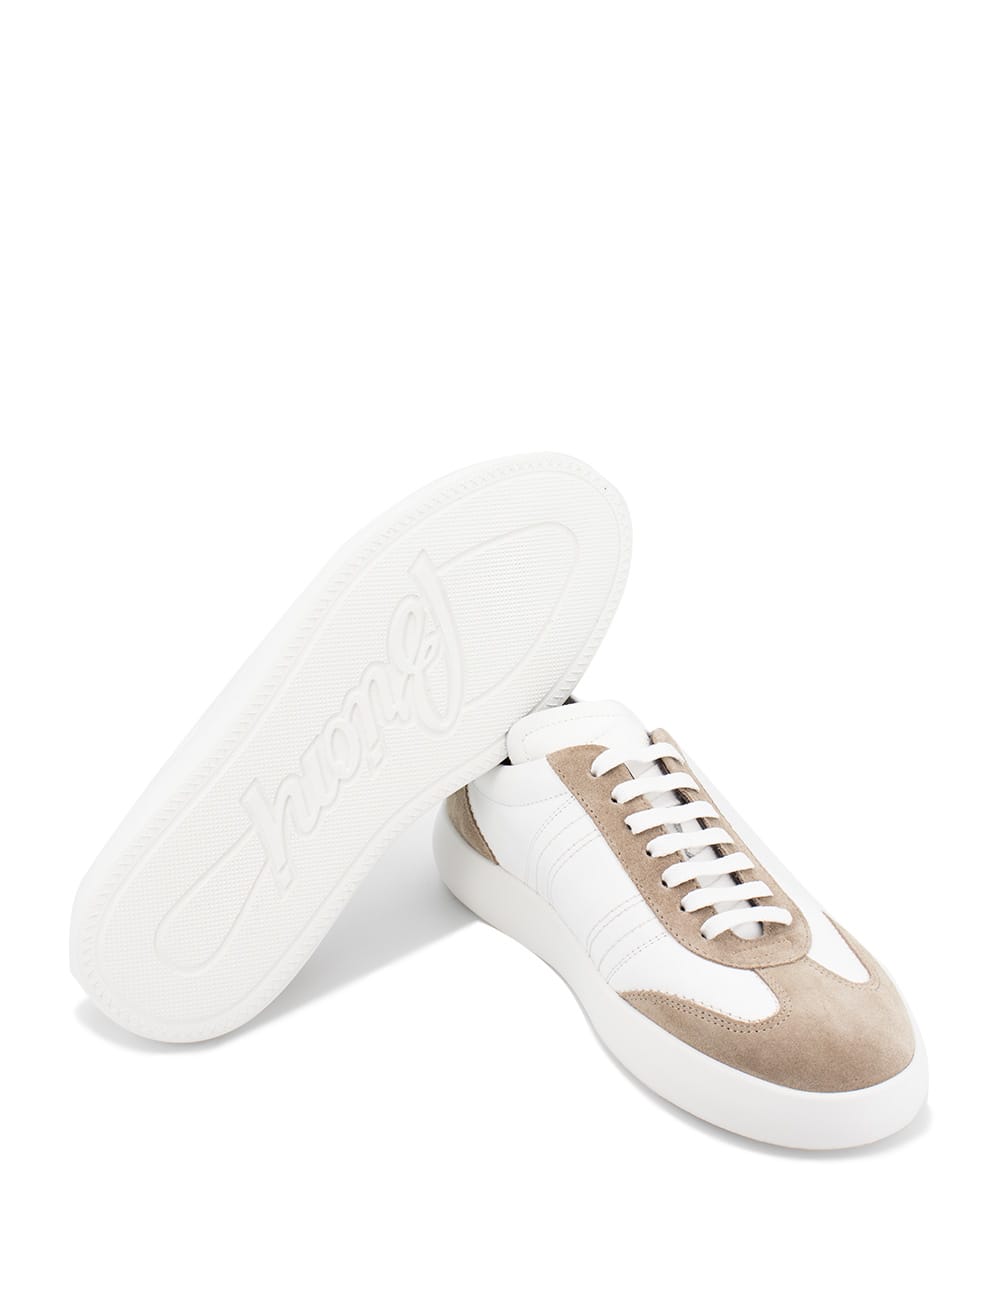 Shop Brioni Sneakers In Sand